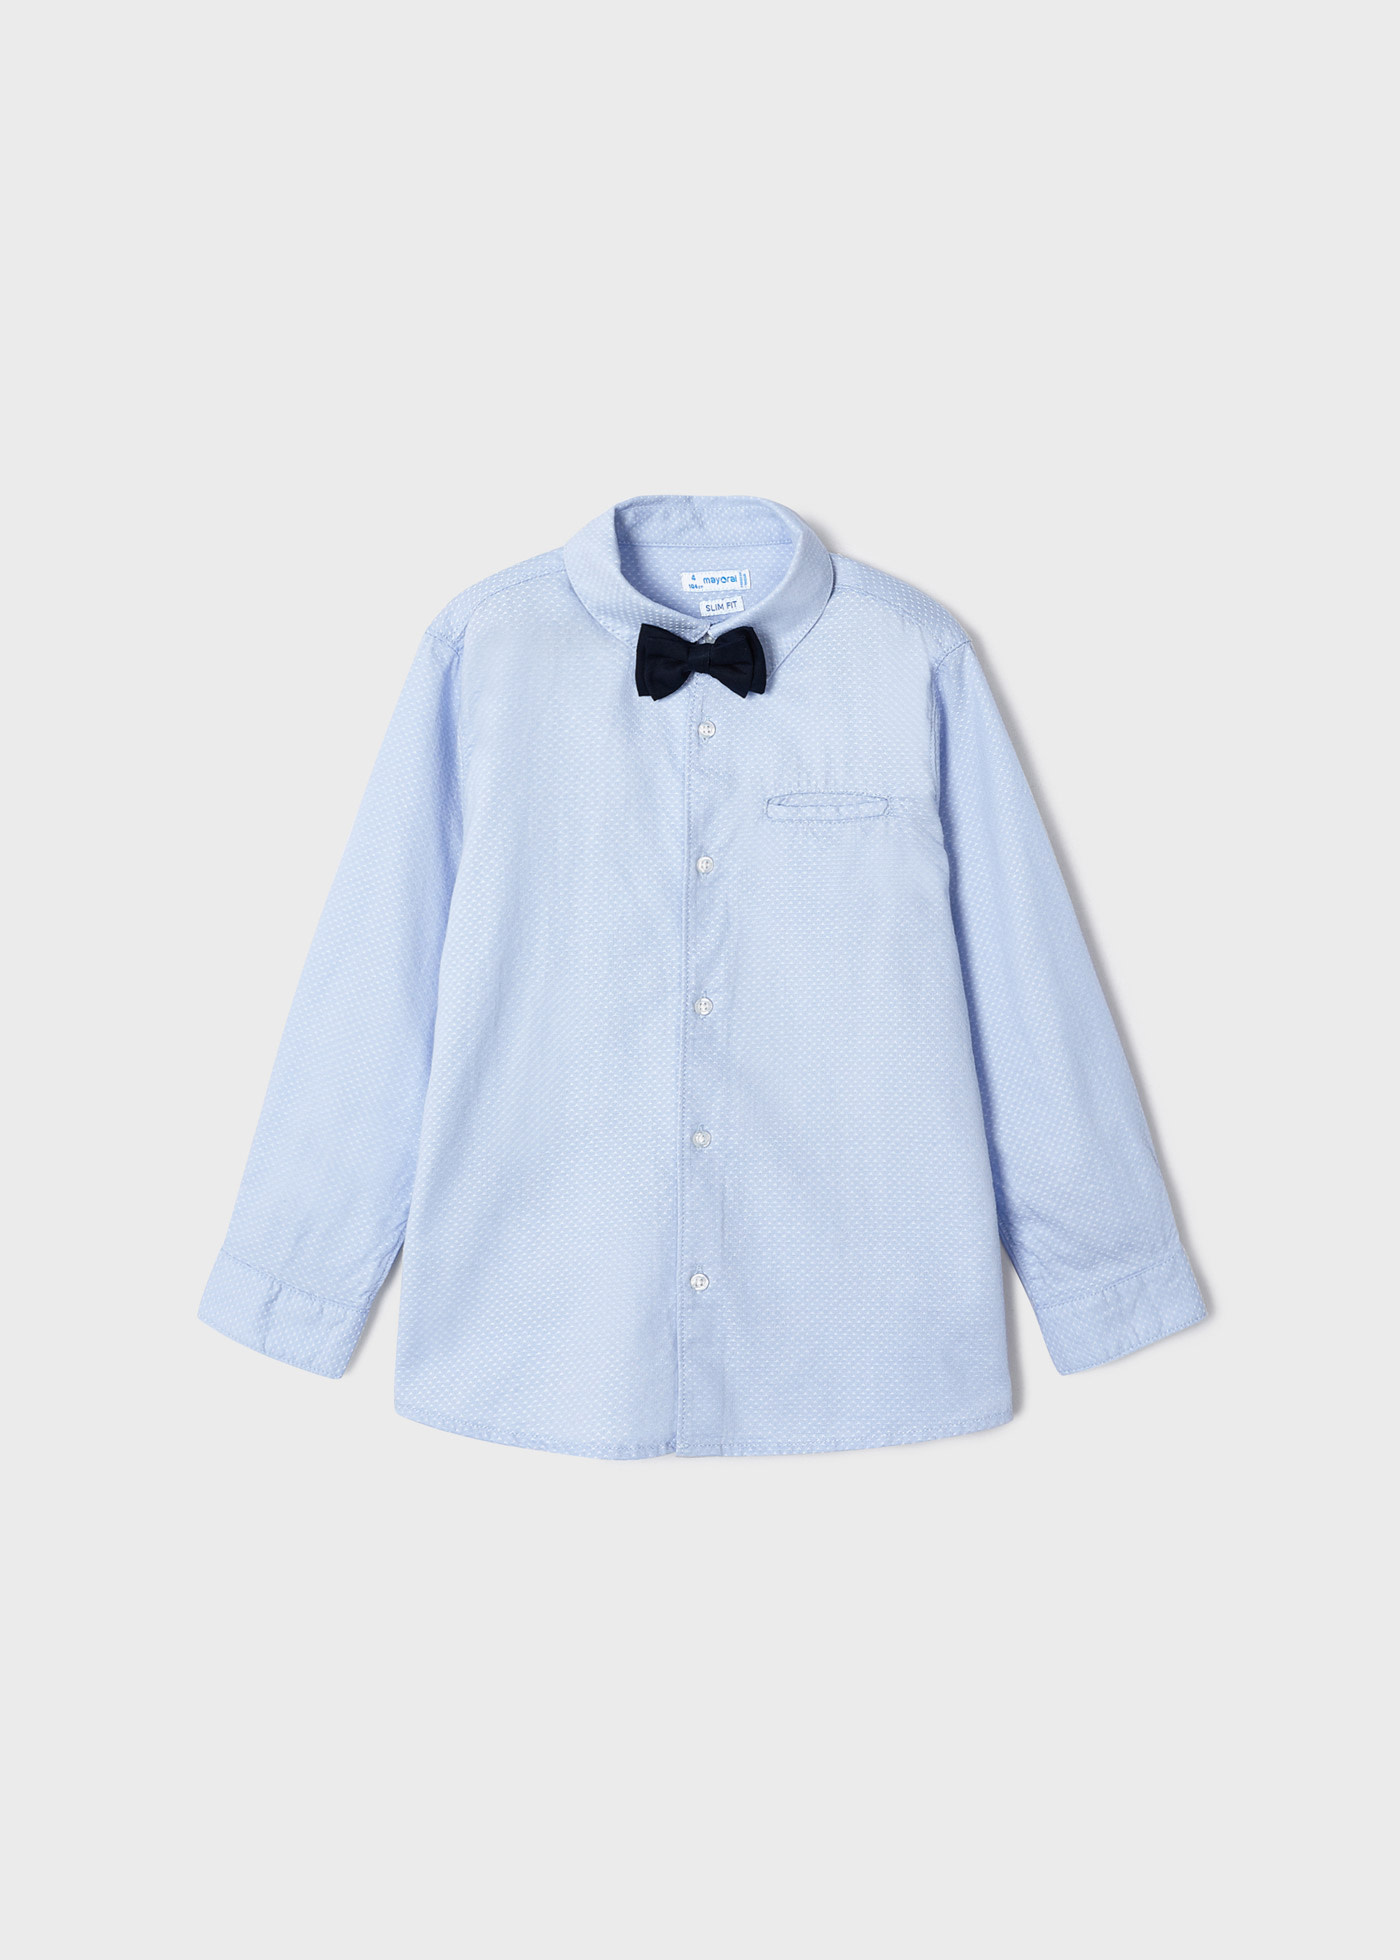 Boy shirt with bow tie Better Cotton